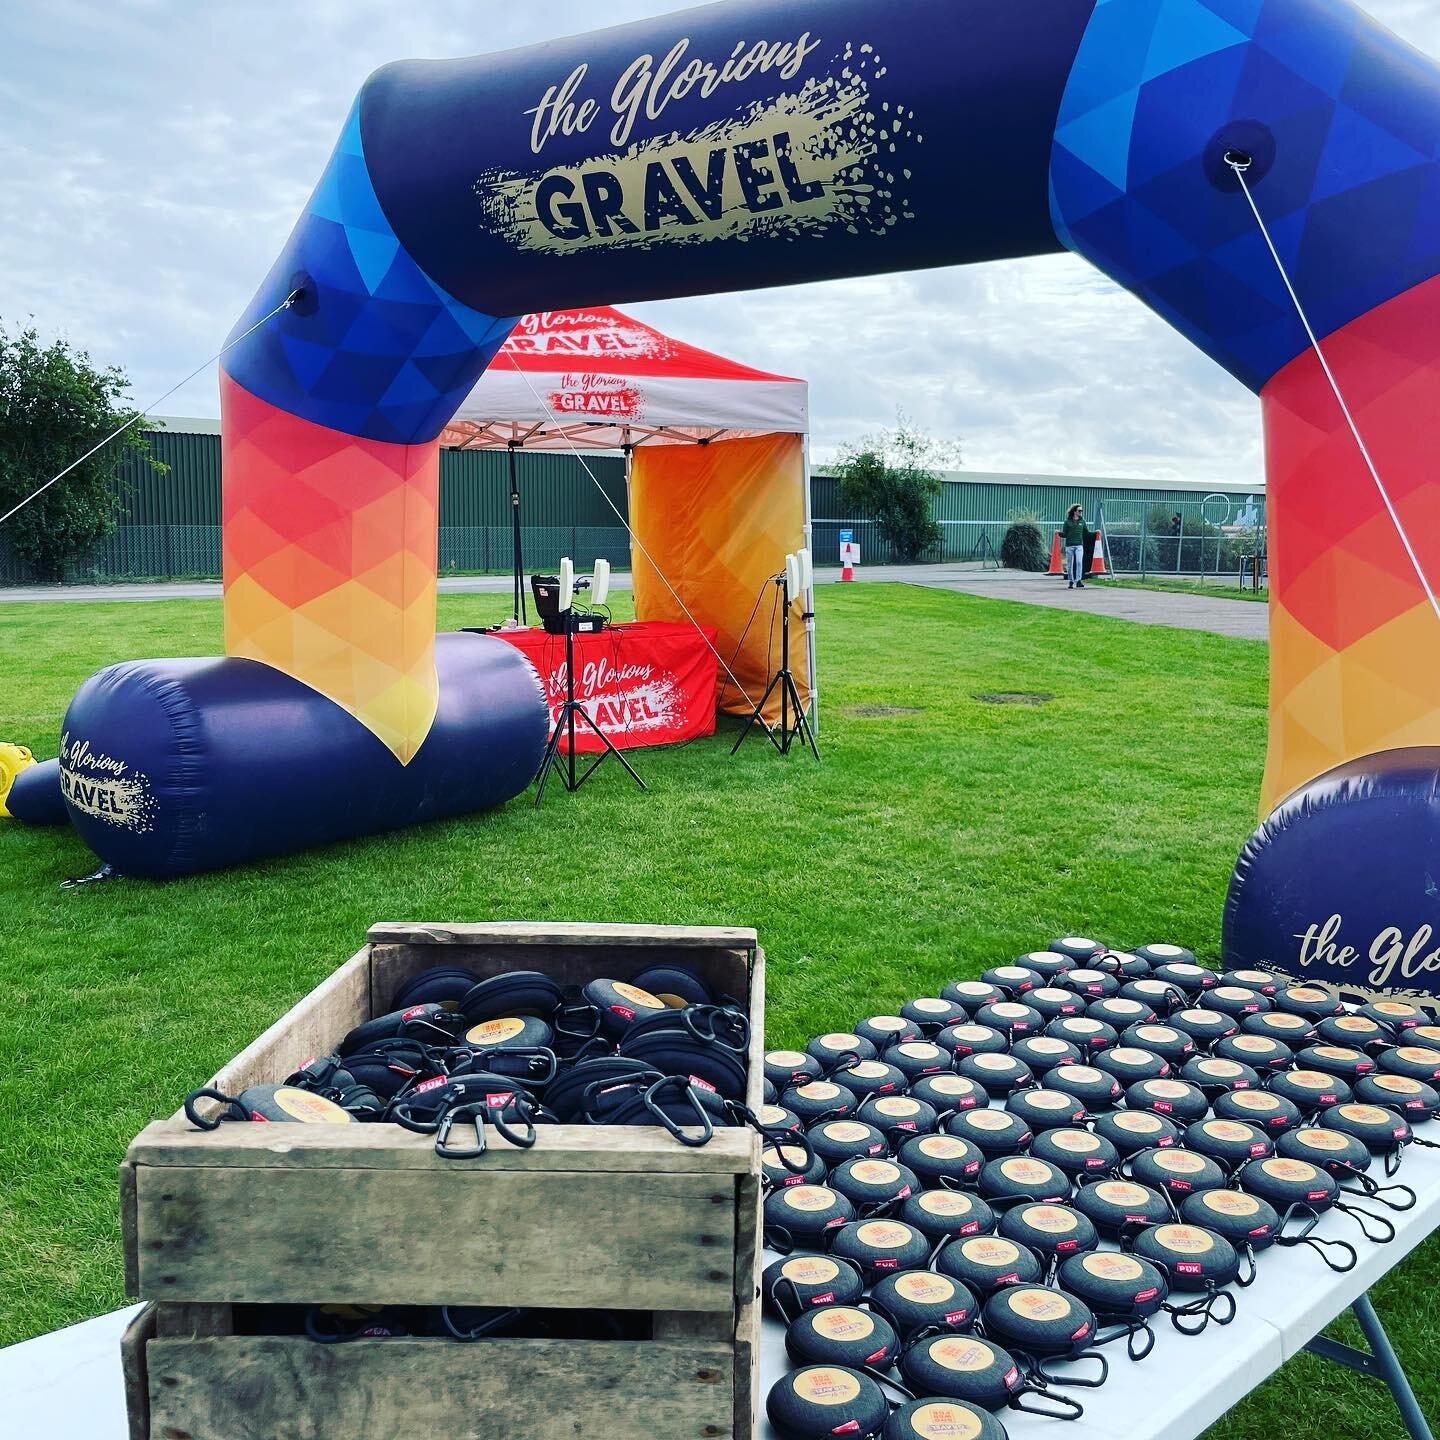 Another excellent day out at @thruxtonracing with @gloriousgravel for their autumn ride. Well done to all who took part, enjoy your PUK&rsquo;s!
#sailsburyplain #gravelbike #wahooligan #showerpuk #showerbar #soap

#soap #pukplastic #showerpuk #refill